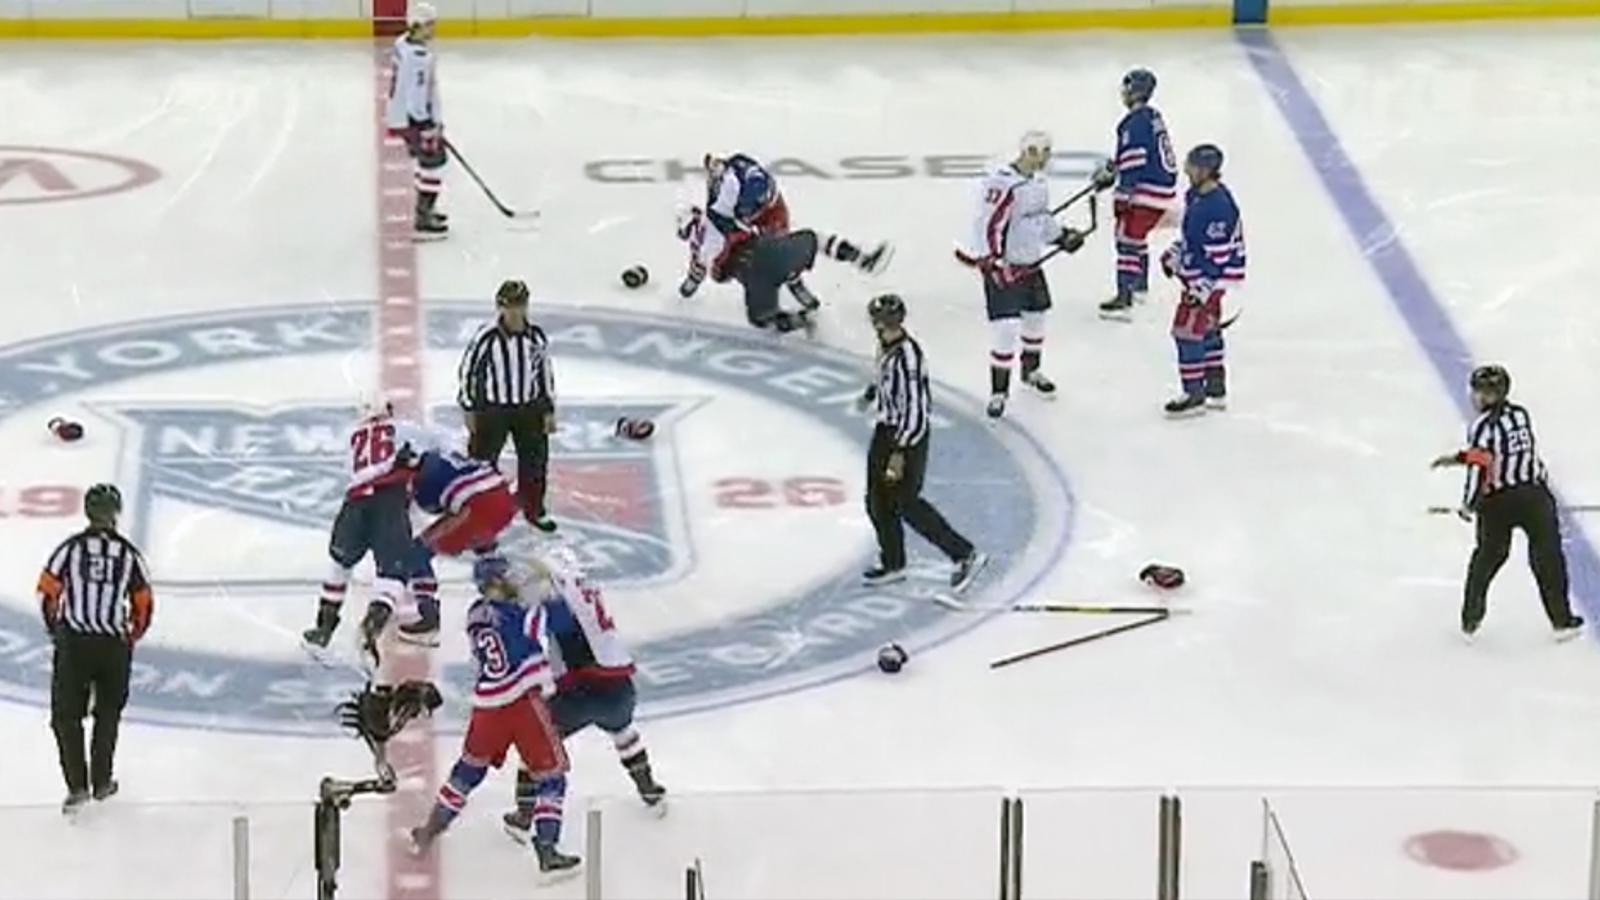 Line brawl, Tom Wilson injury, Buchnevich game ejection, Oshie hat trick and all the craziness from last night's game between Rangers and Capitals